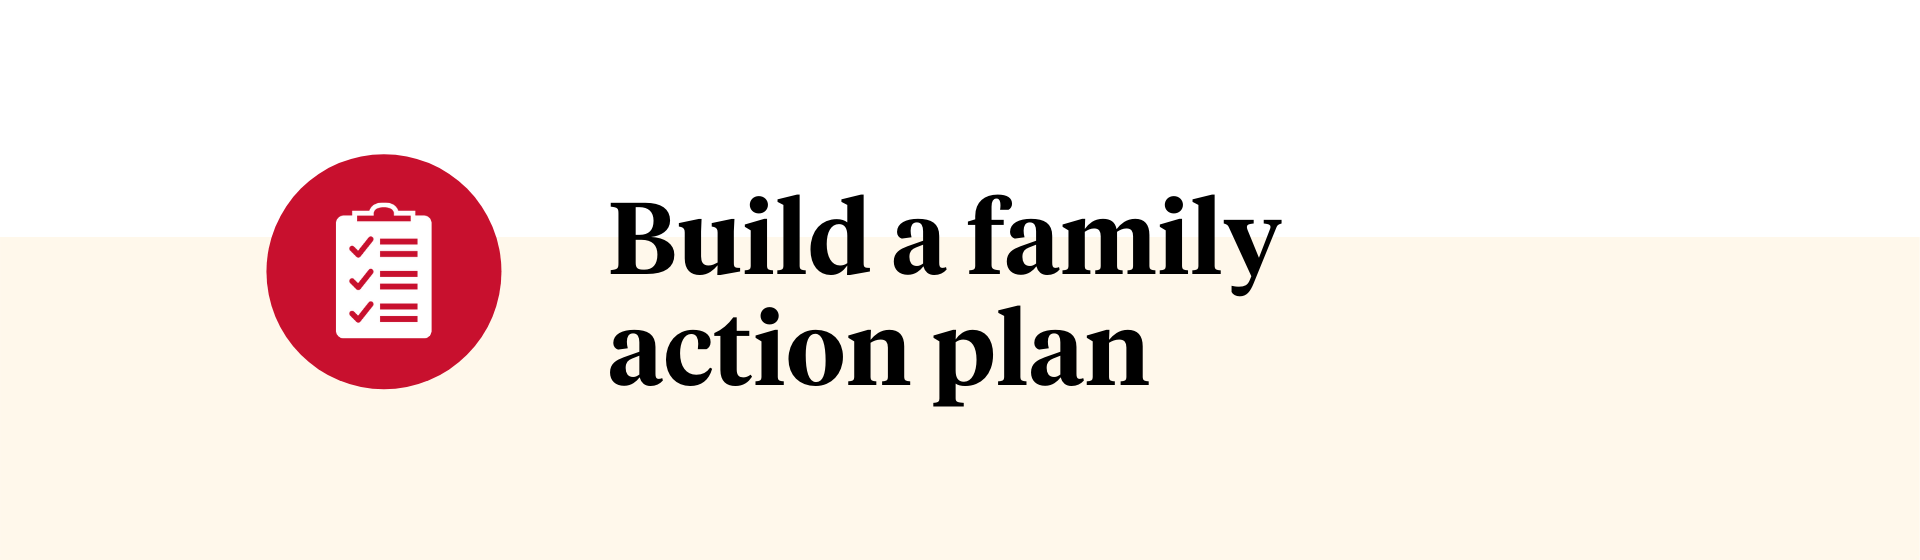 Build a family plan graphic.